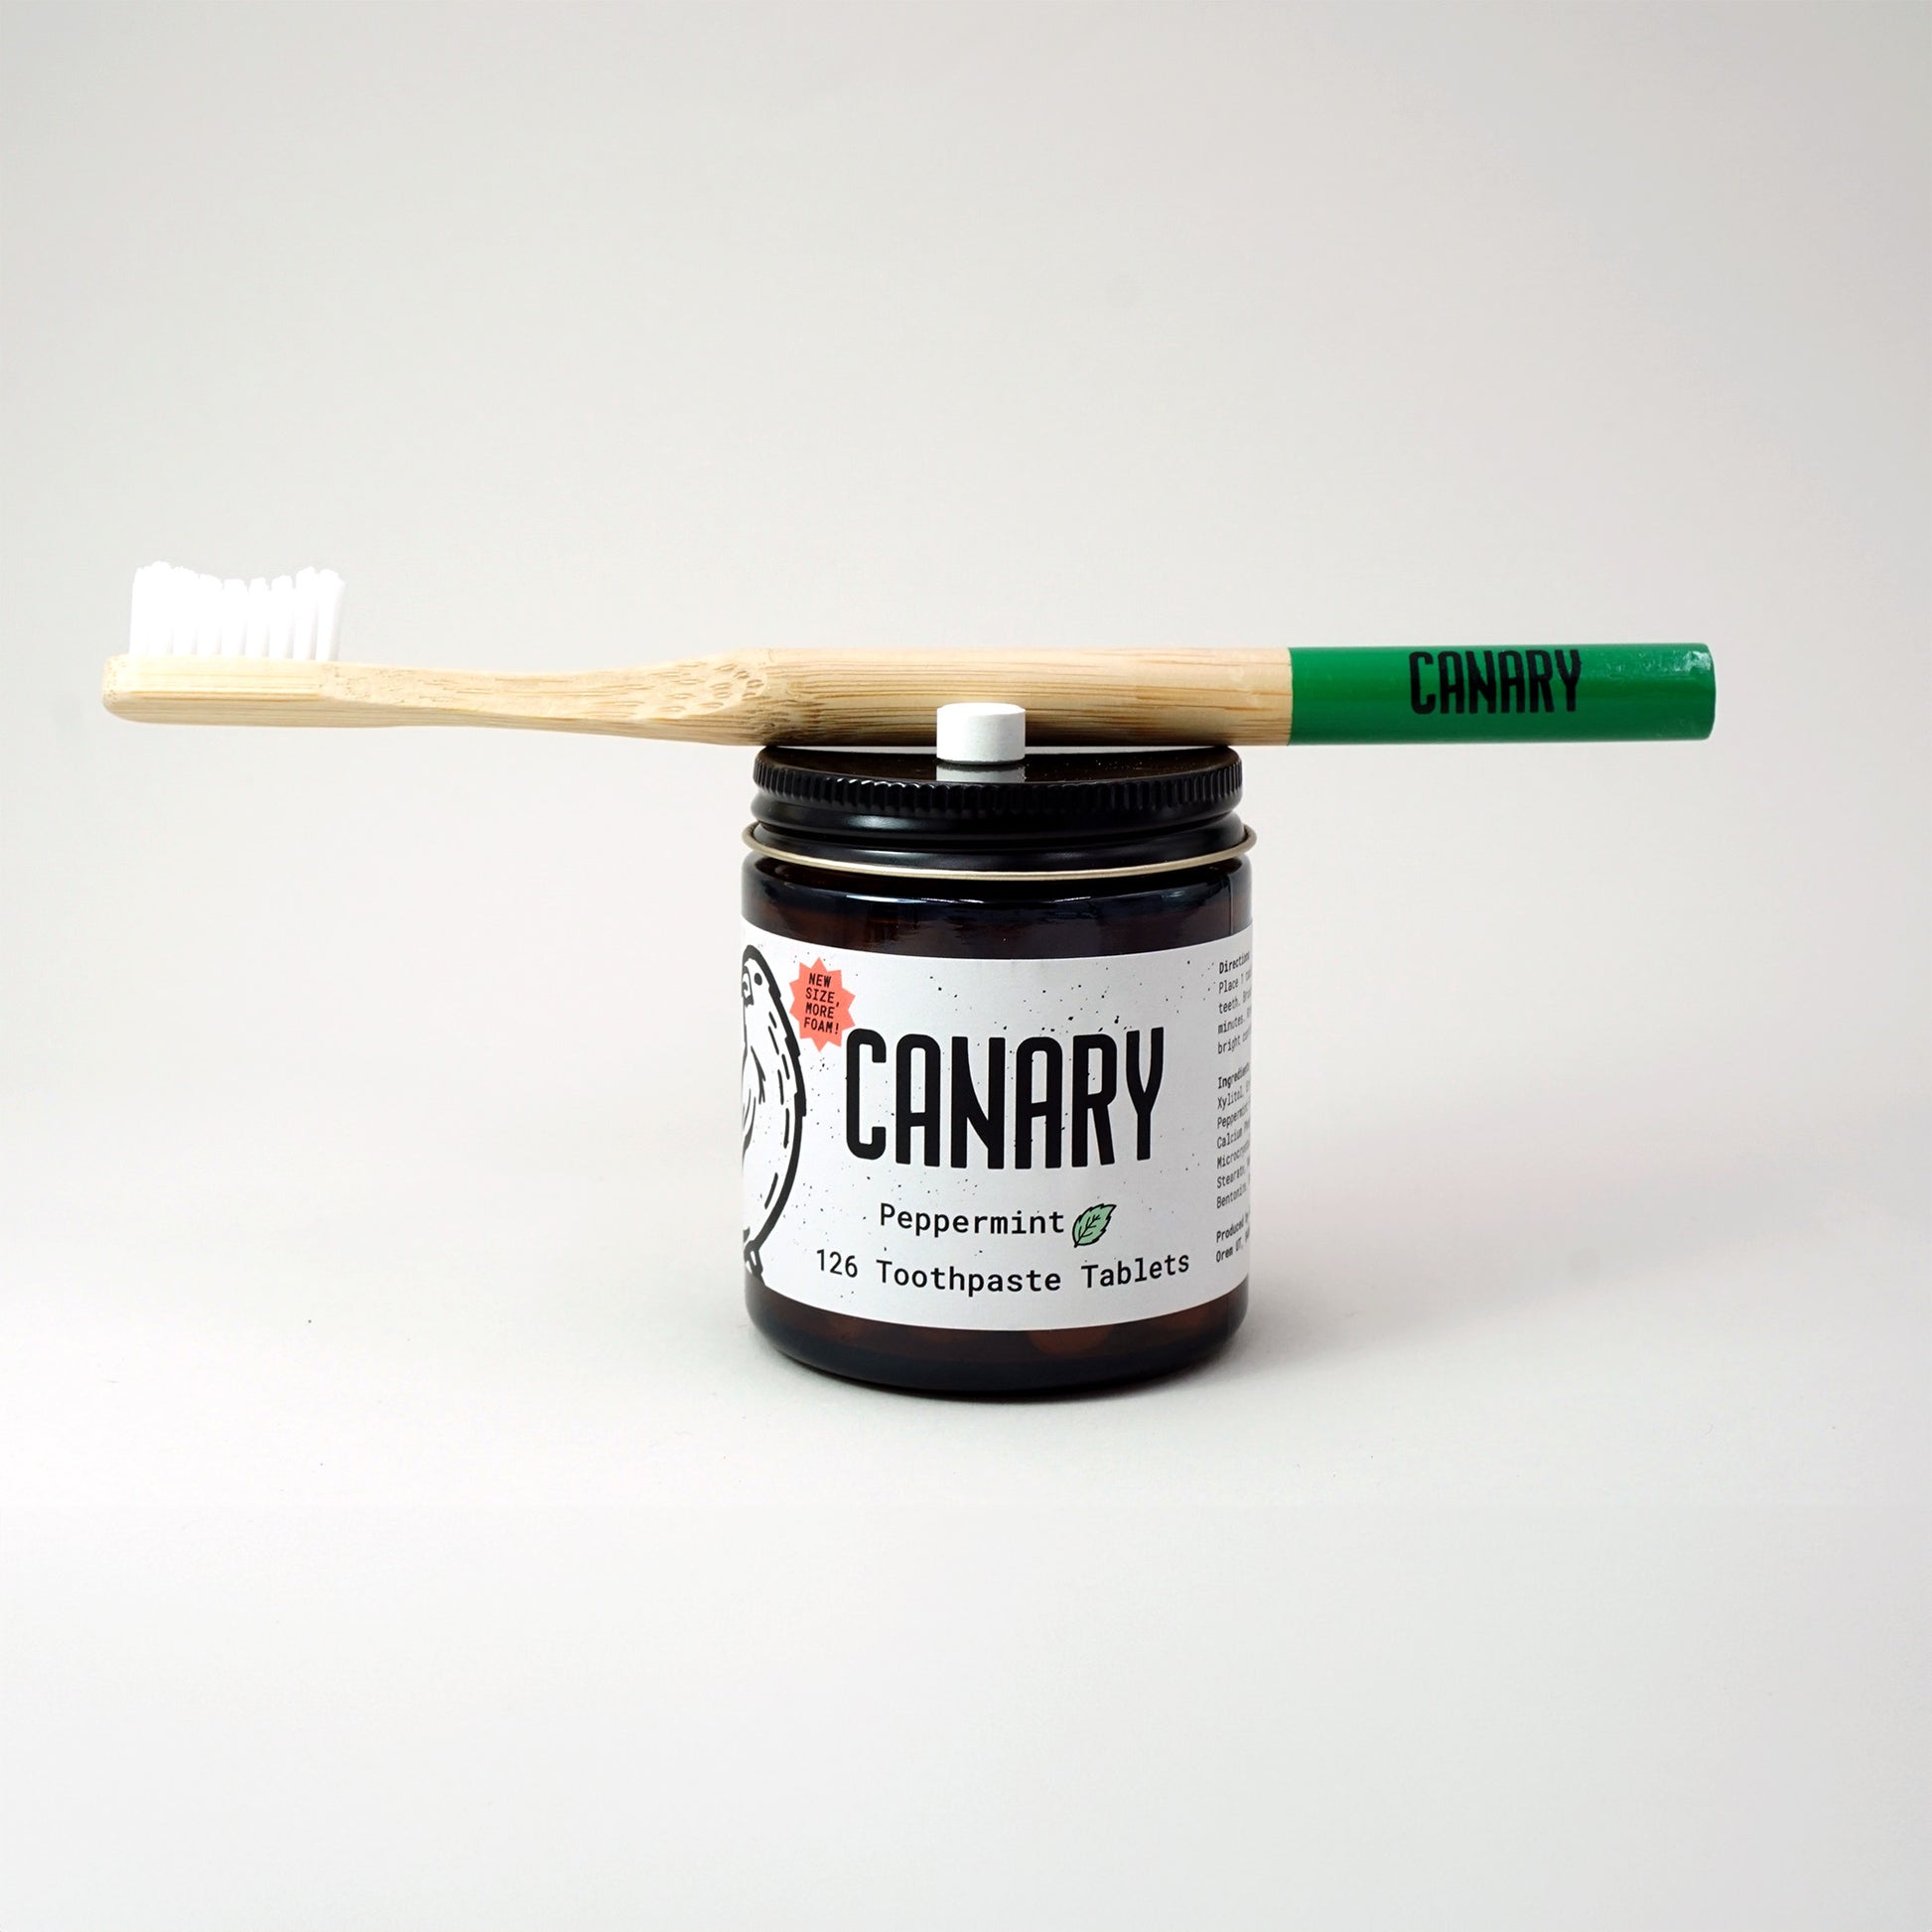 New and improved Canary Peppermint Toothpaste Tablets, 126 count jar, front view with green-tipped Canary toothbrush